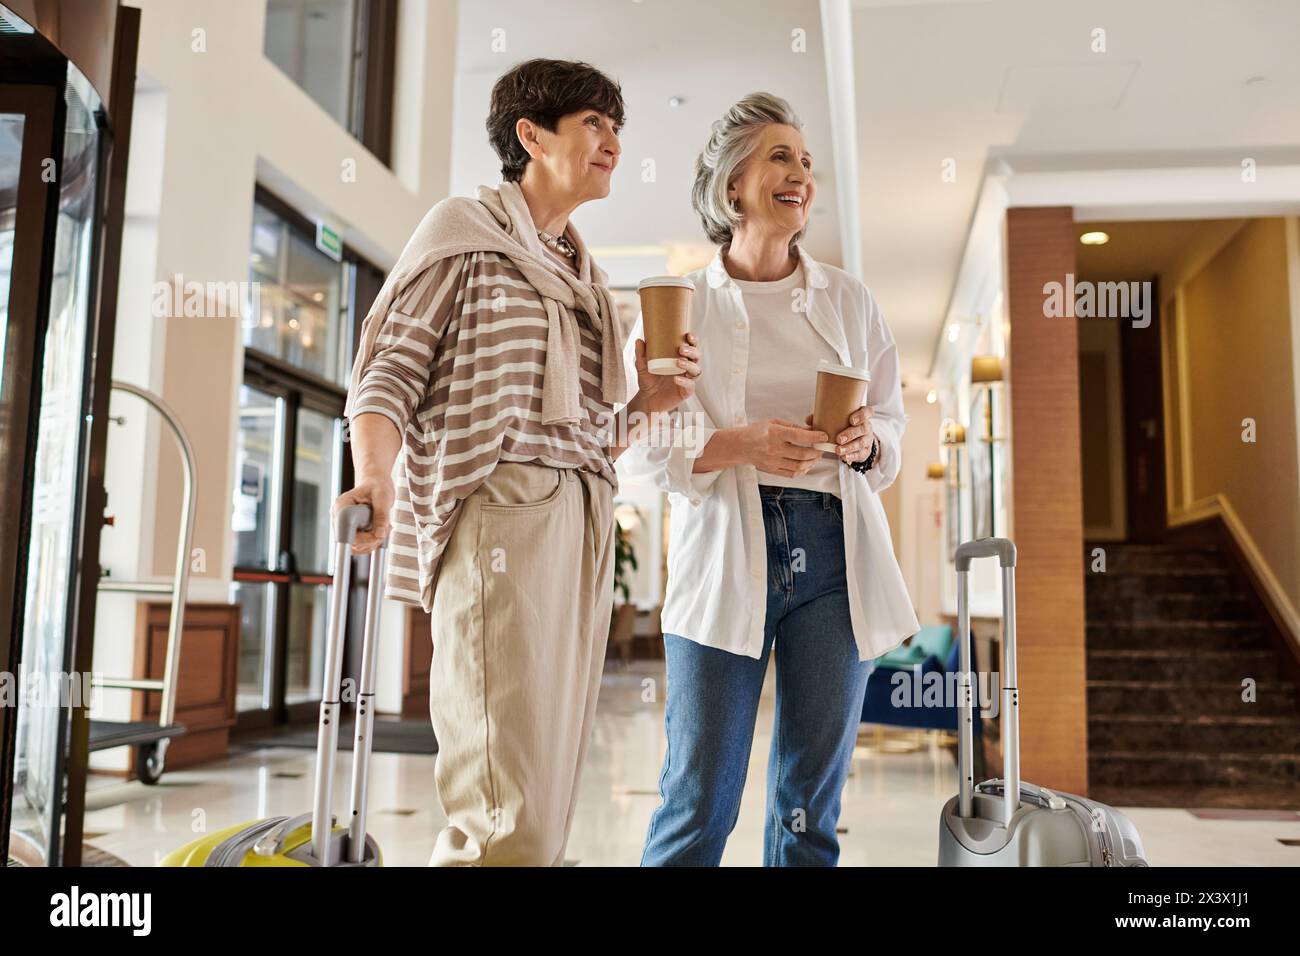 A senior lesbian couple stands with luggage, ready for adventure. Stock Photo